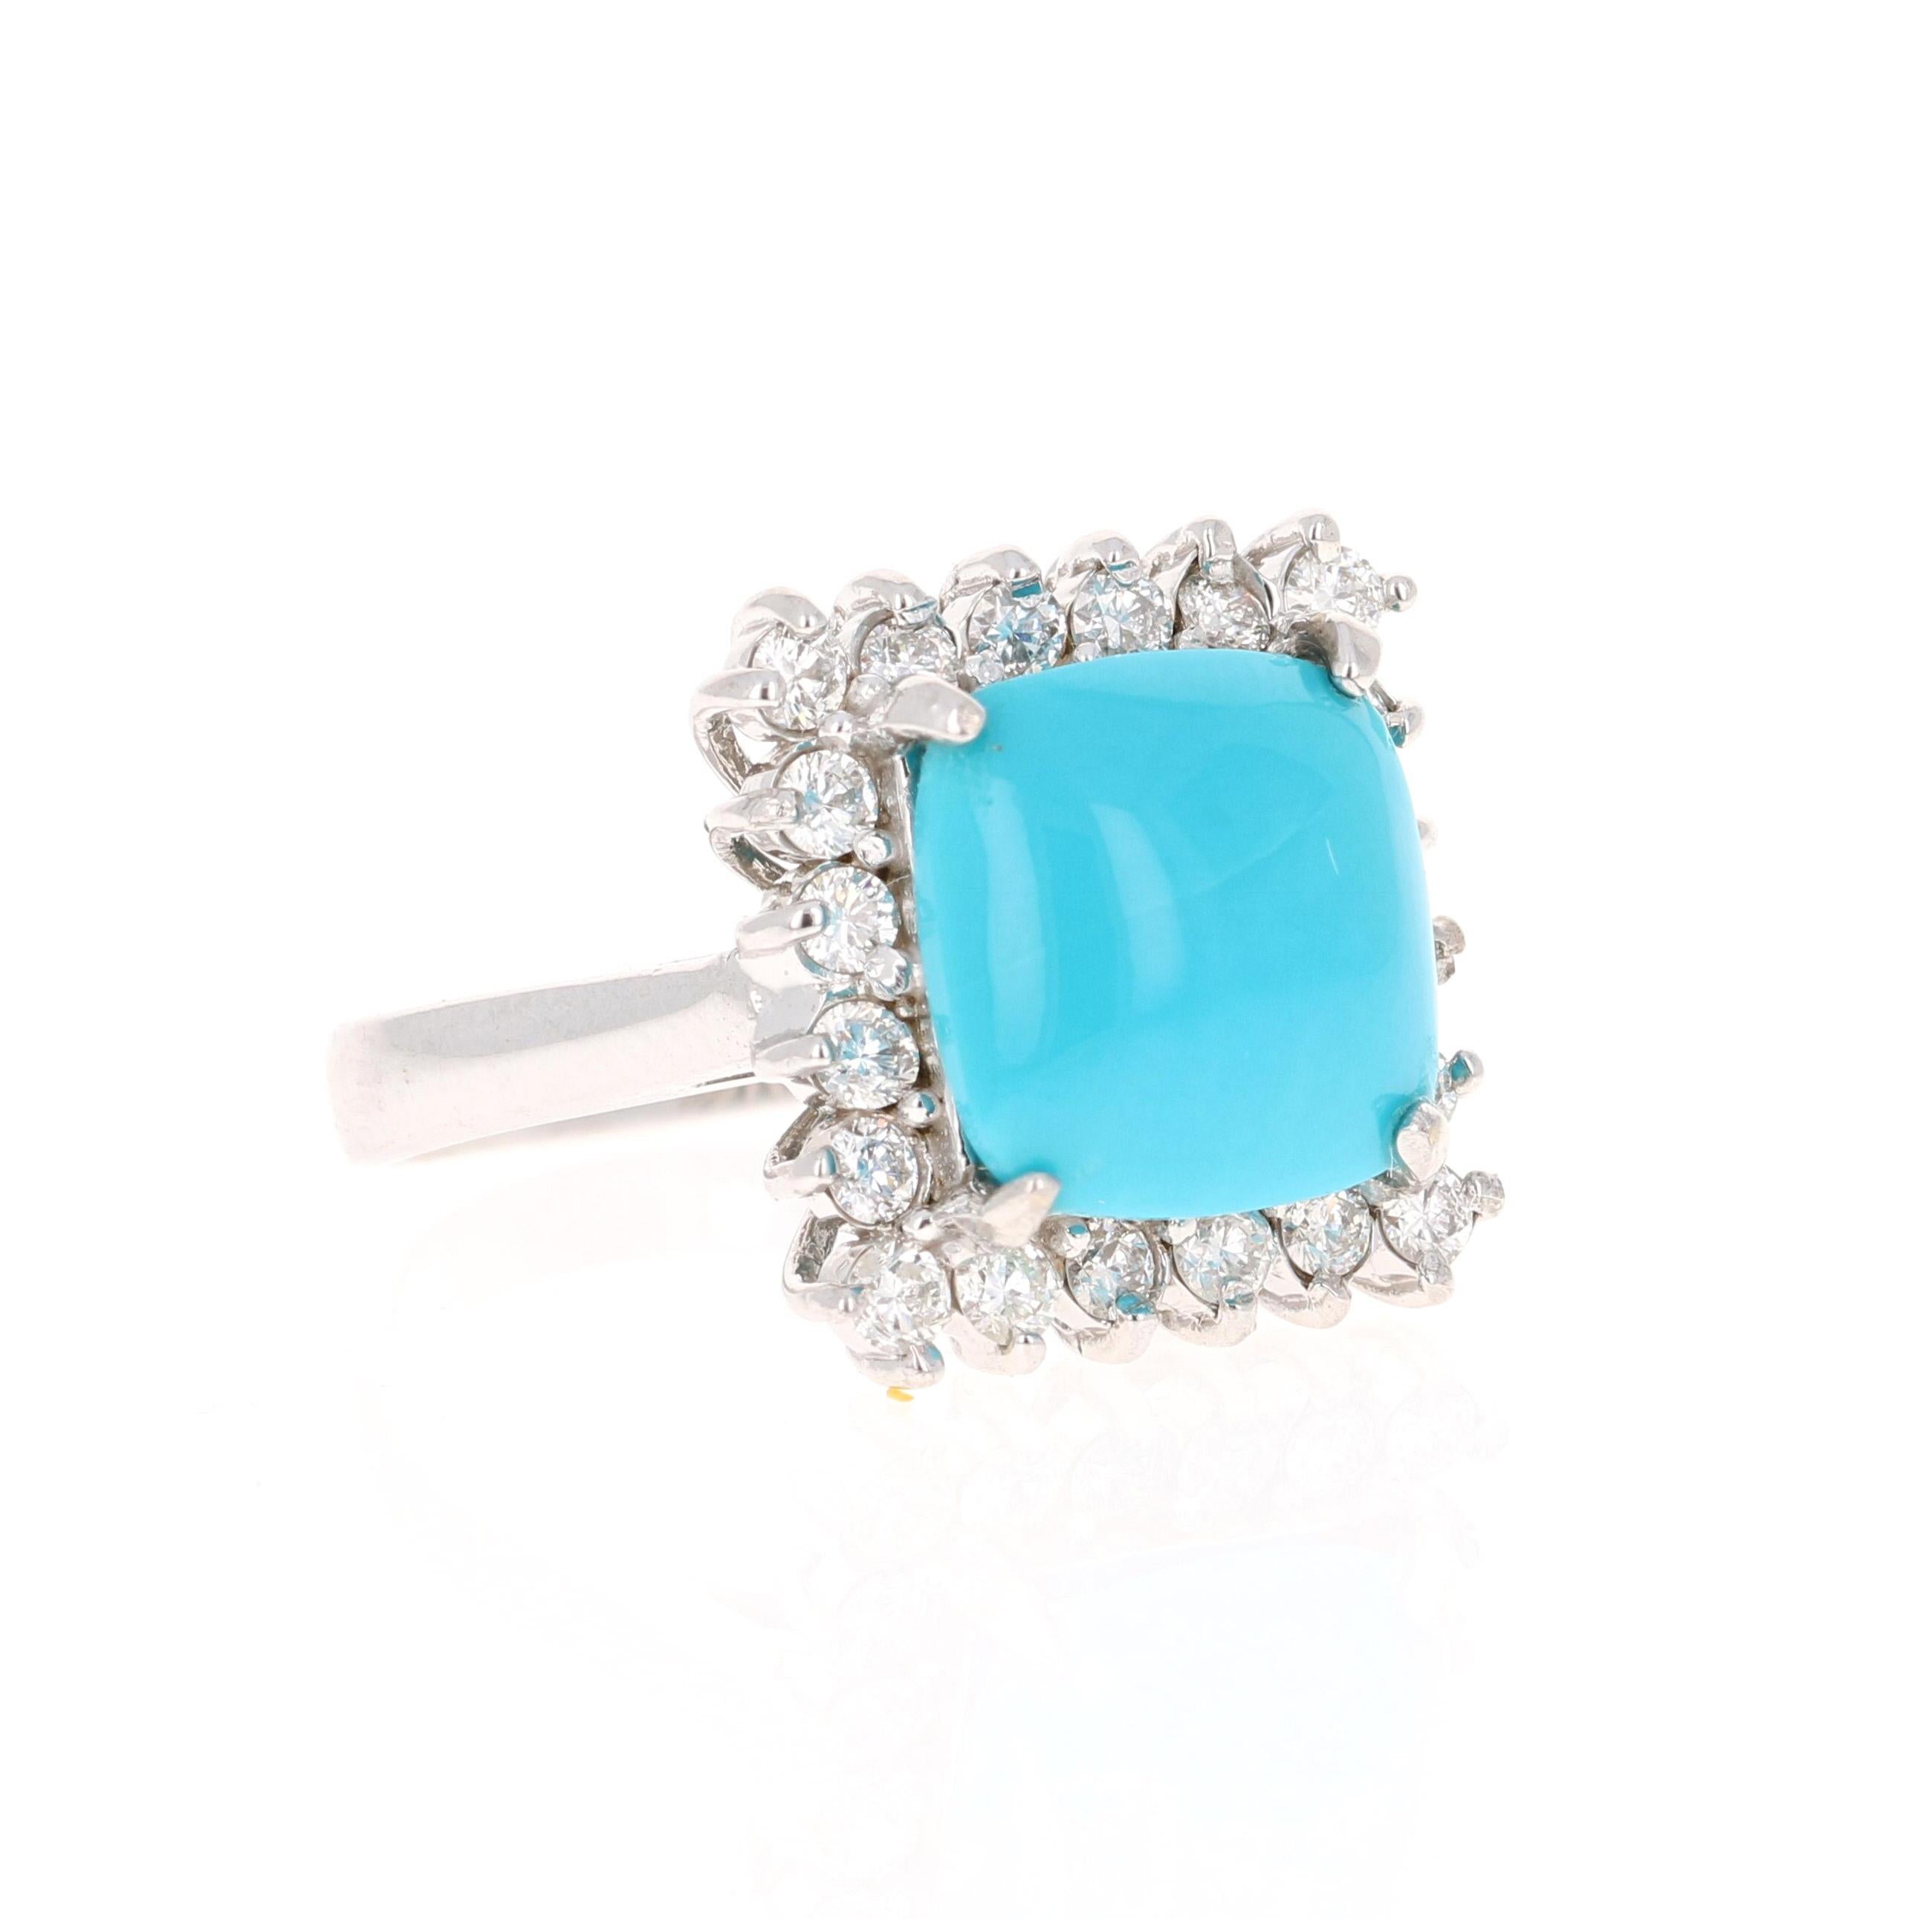 The Cushion Cut Turquoise is 5.00 Carats and is surrounded by a Halo of beautifully set diamonds. 
There are 20 Round Cut Diamonds that weigh 0.71 Carats (Clarity: SI2, Color: F).
The total carat weight of the ring is 5.71 Carats. 
The ring is